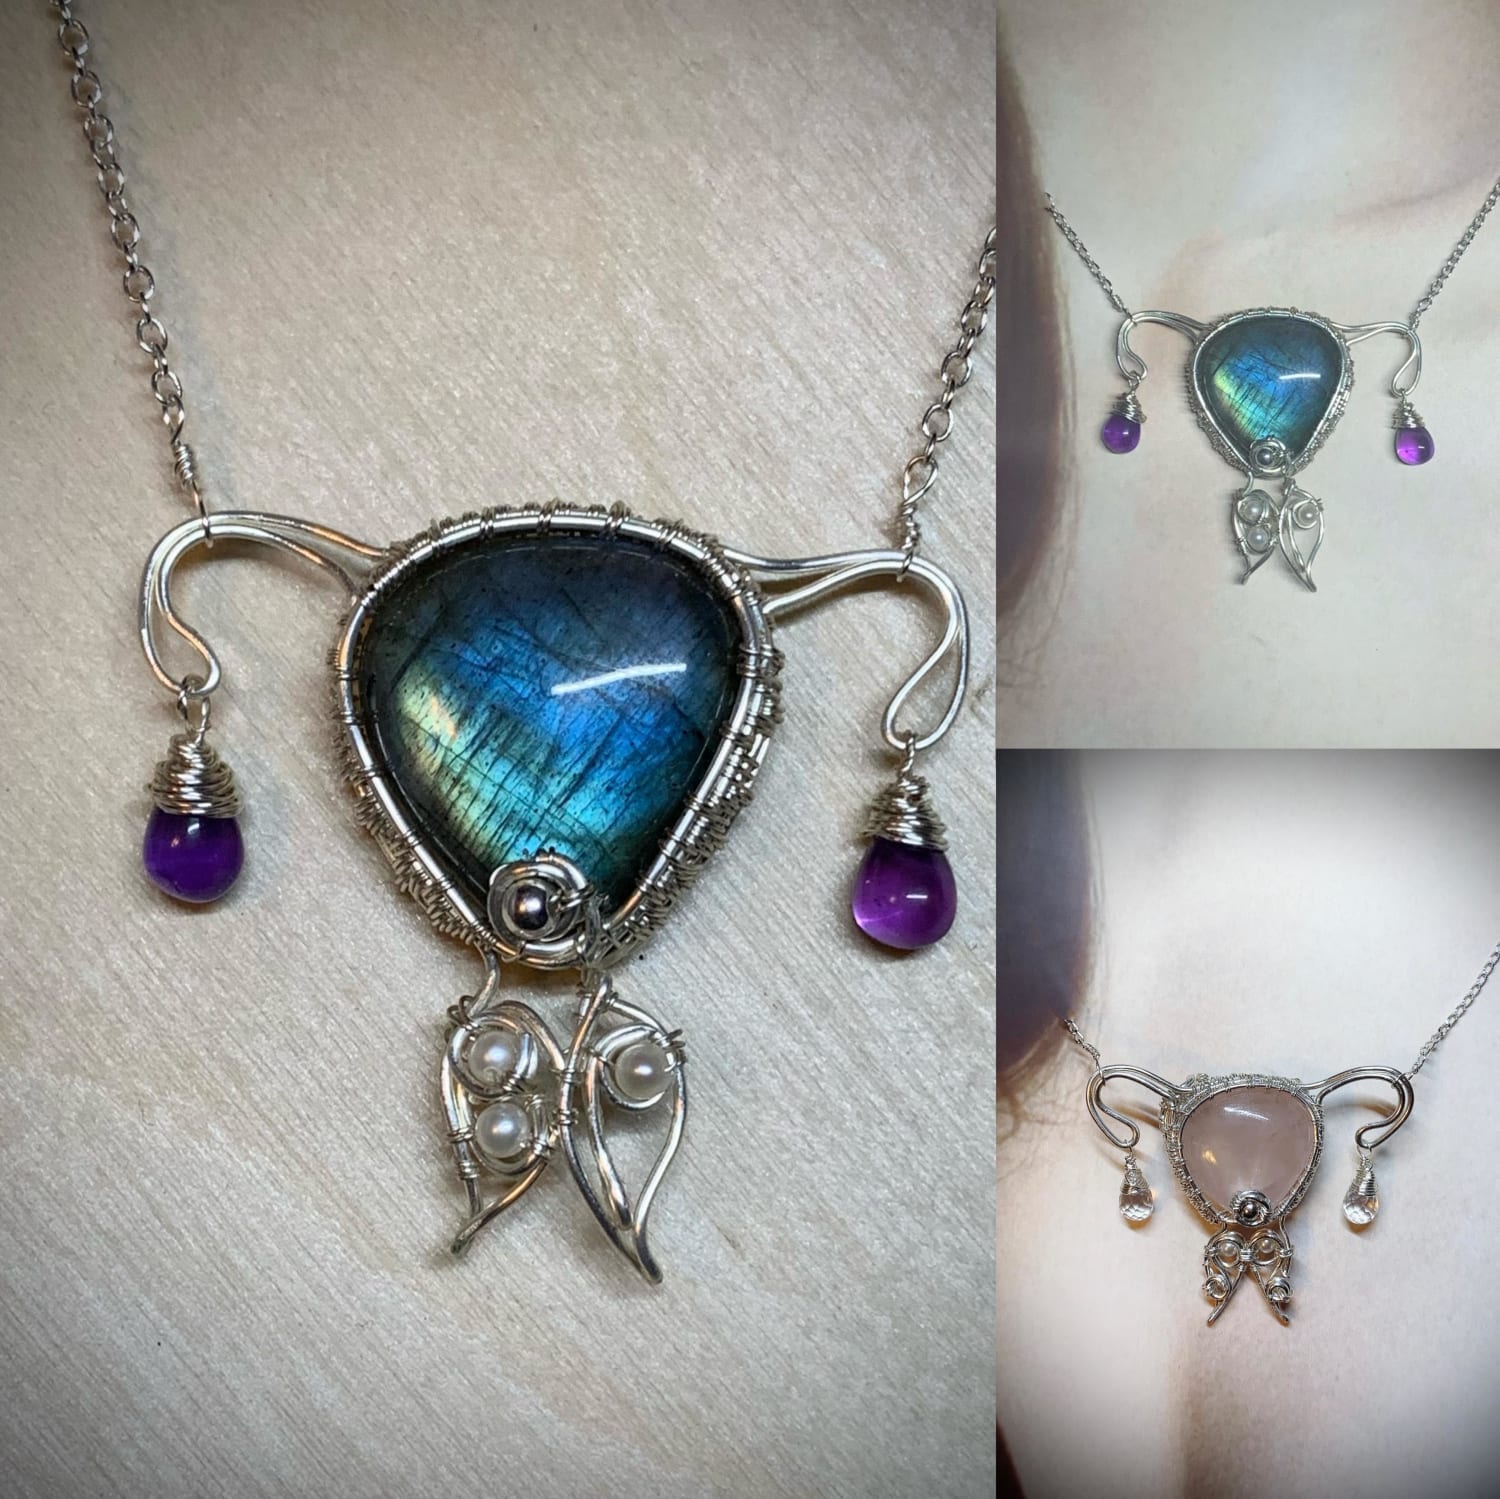 I made these uterus necklaces with sterling silver wire, labradorite, pink quartz, amethyst, clear quartz, and freshwater pearls.